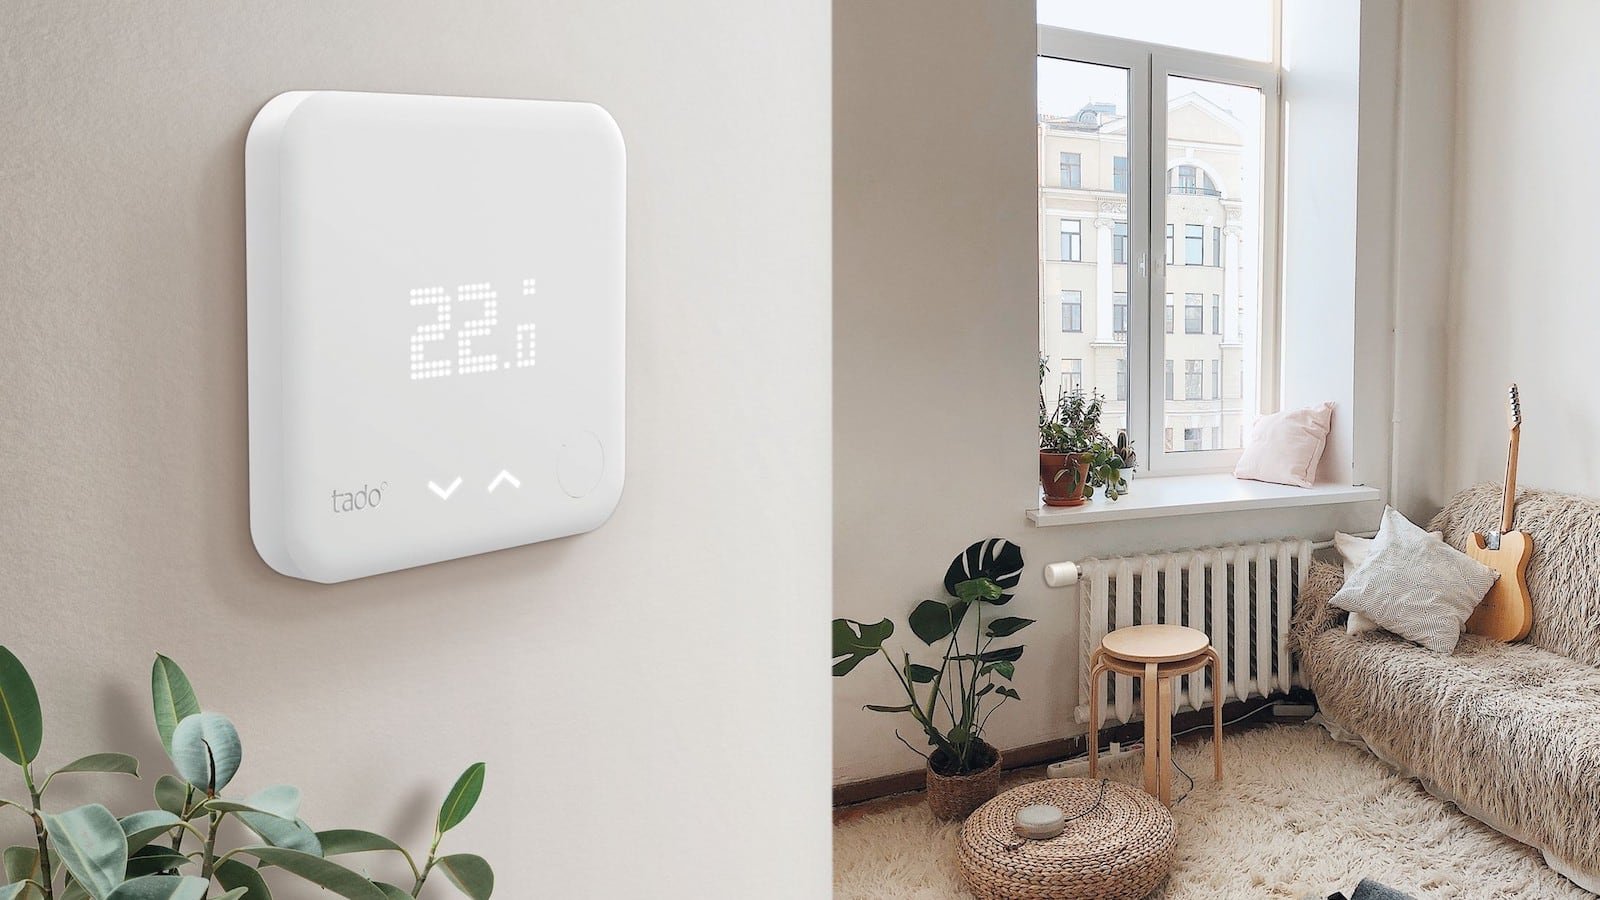 tado° Smart Thermostat V3+ detects open windows to save money